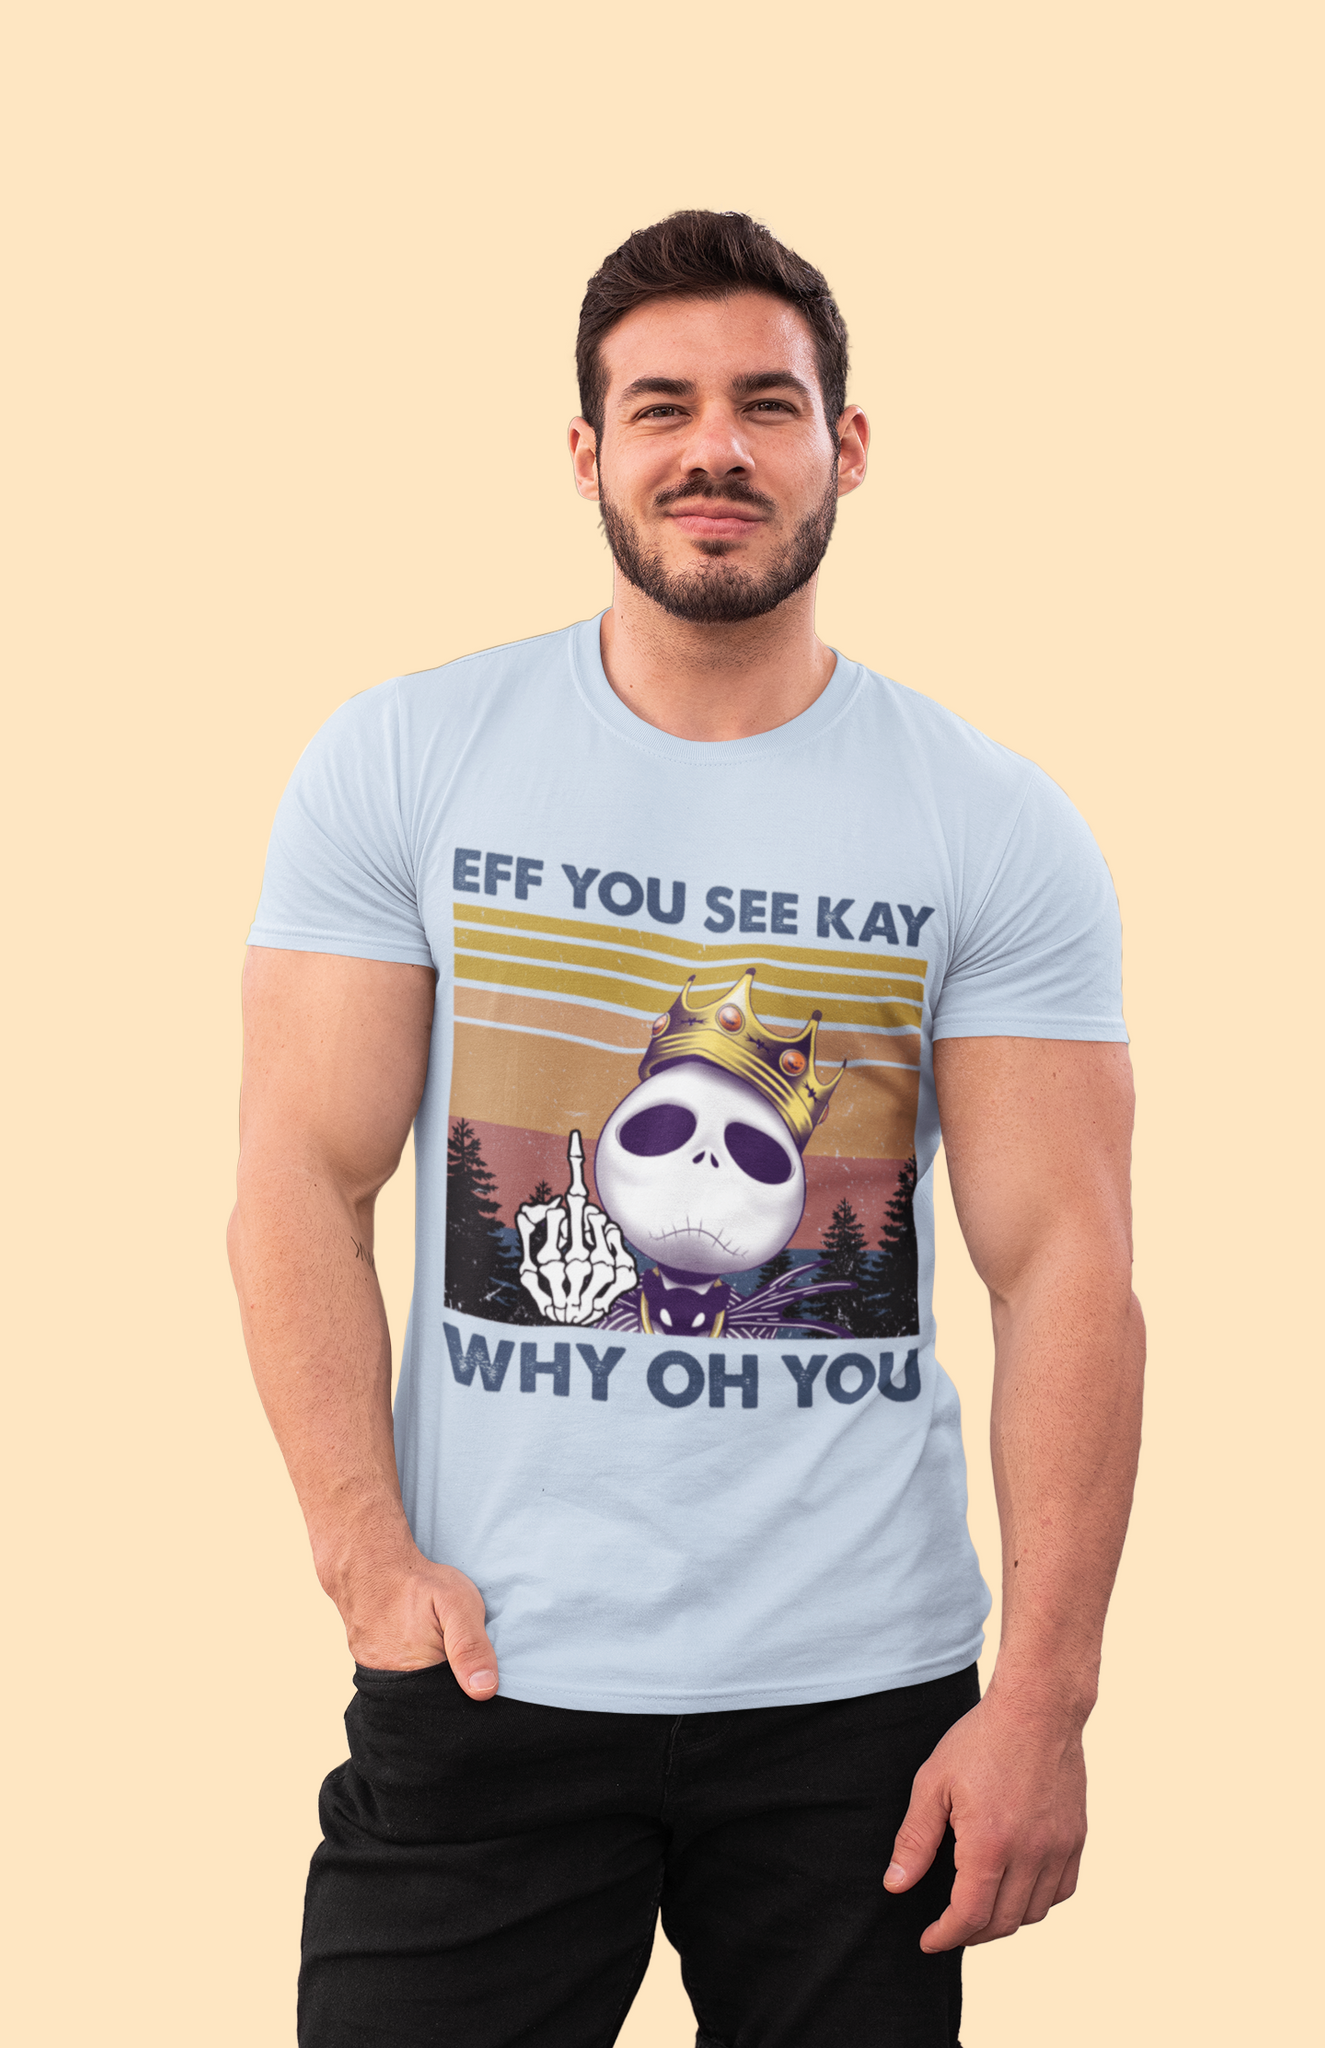 Nightmare Before Christmas Vintage T Shirt, Eff You See Kay Why Oh You Tshirt, Jack Skellington T Shirt, Halloween Gifts